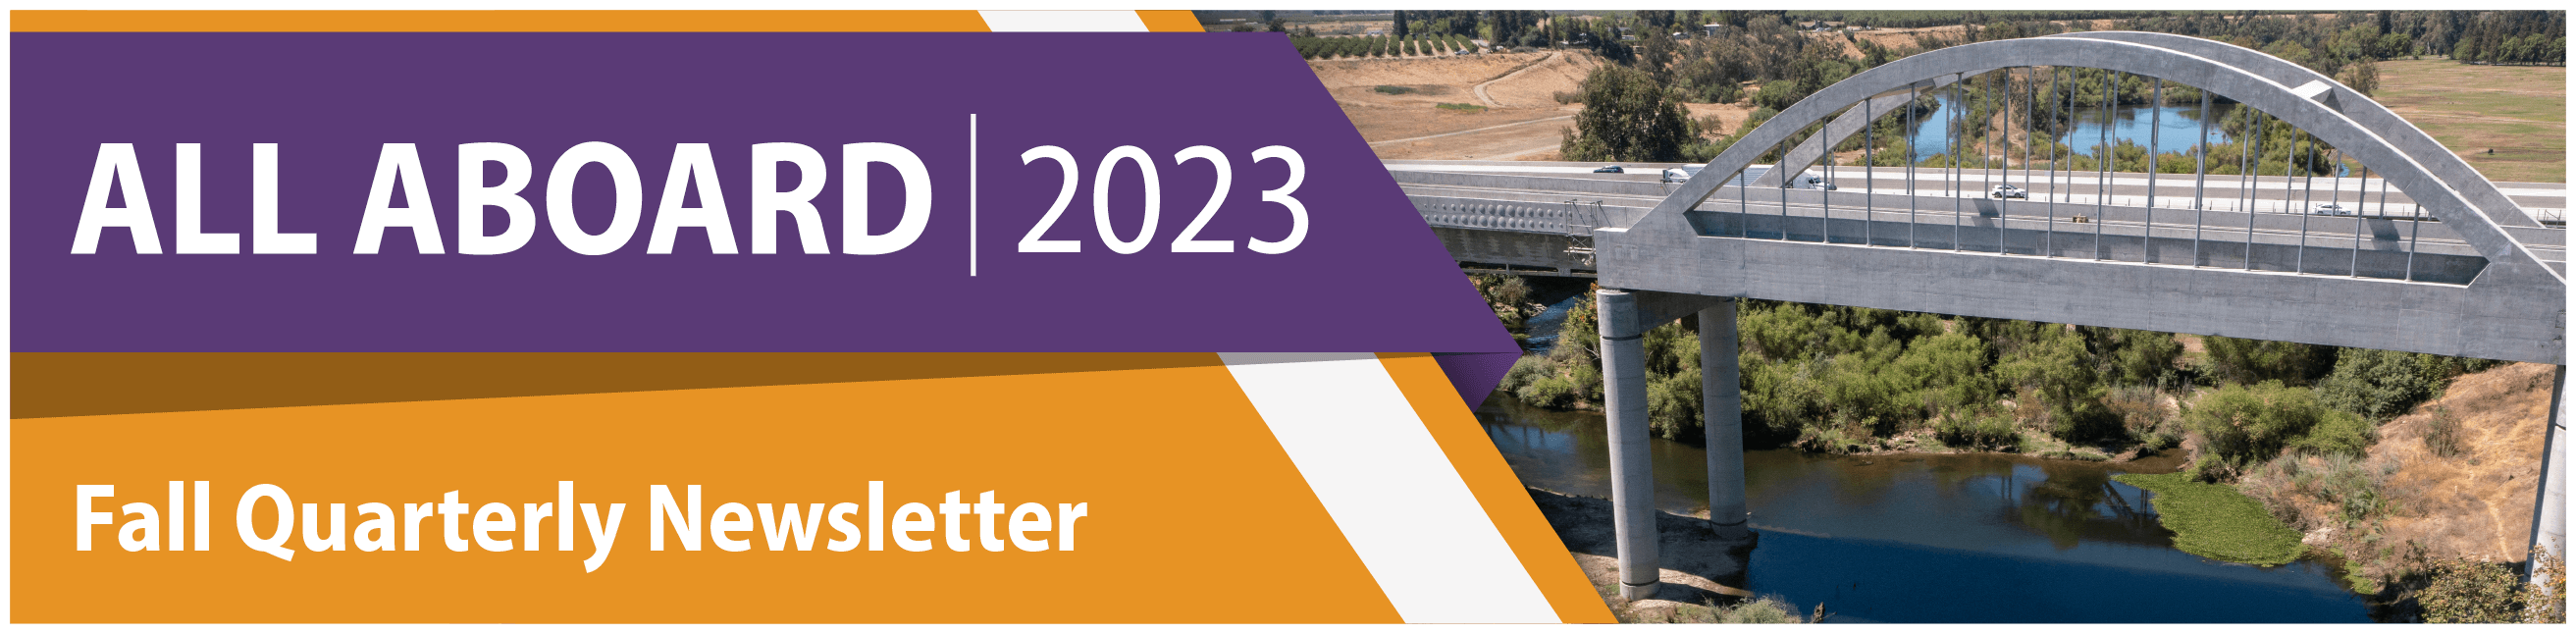 Purple and orange banner that reads "All Aboard 2023 Fall Quarterly Newsletter." Next to the banner is a large viaduct structure with dual arches over a river.